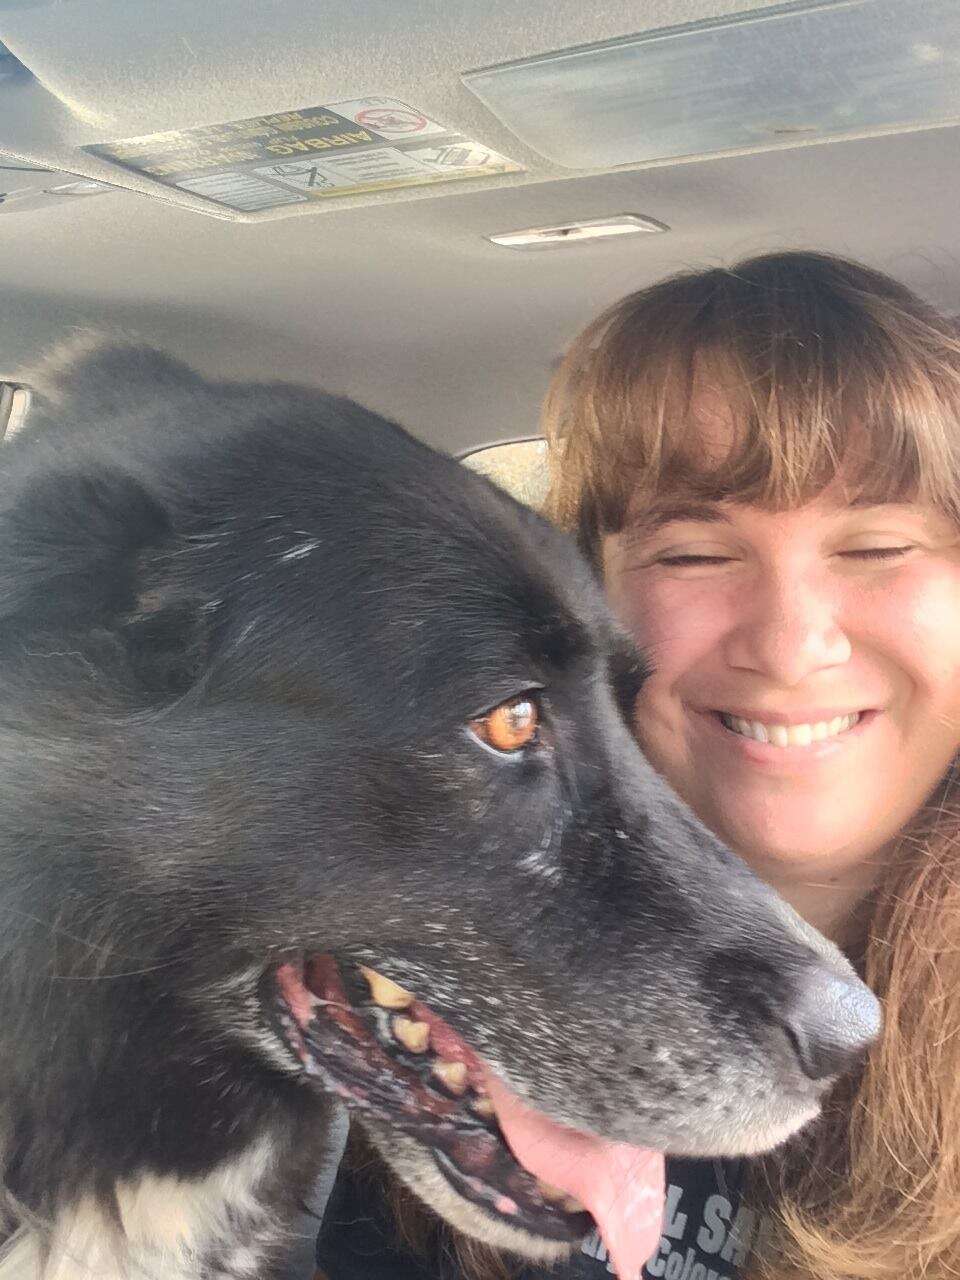 Reagan the dog smiles in the car